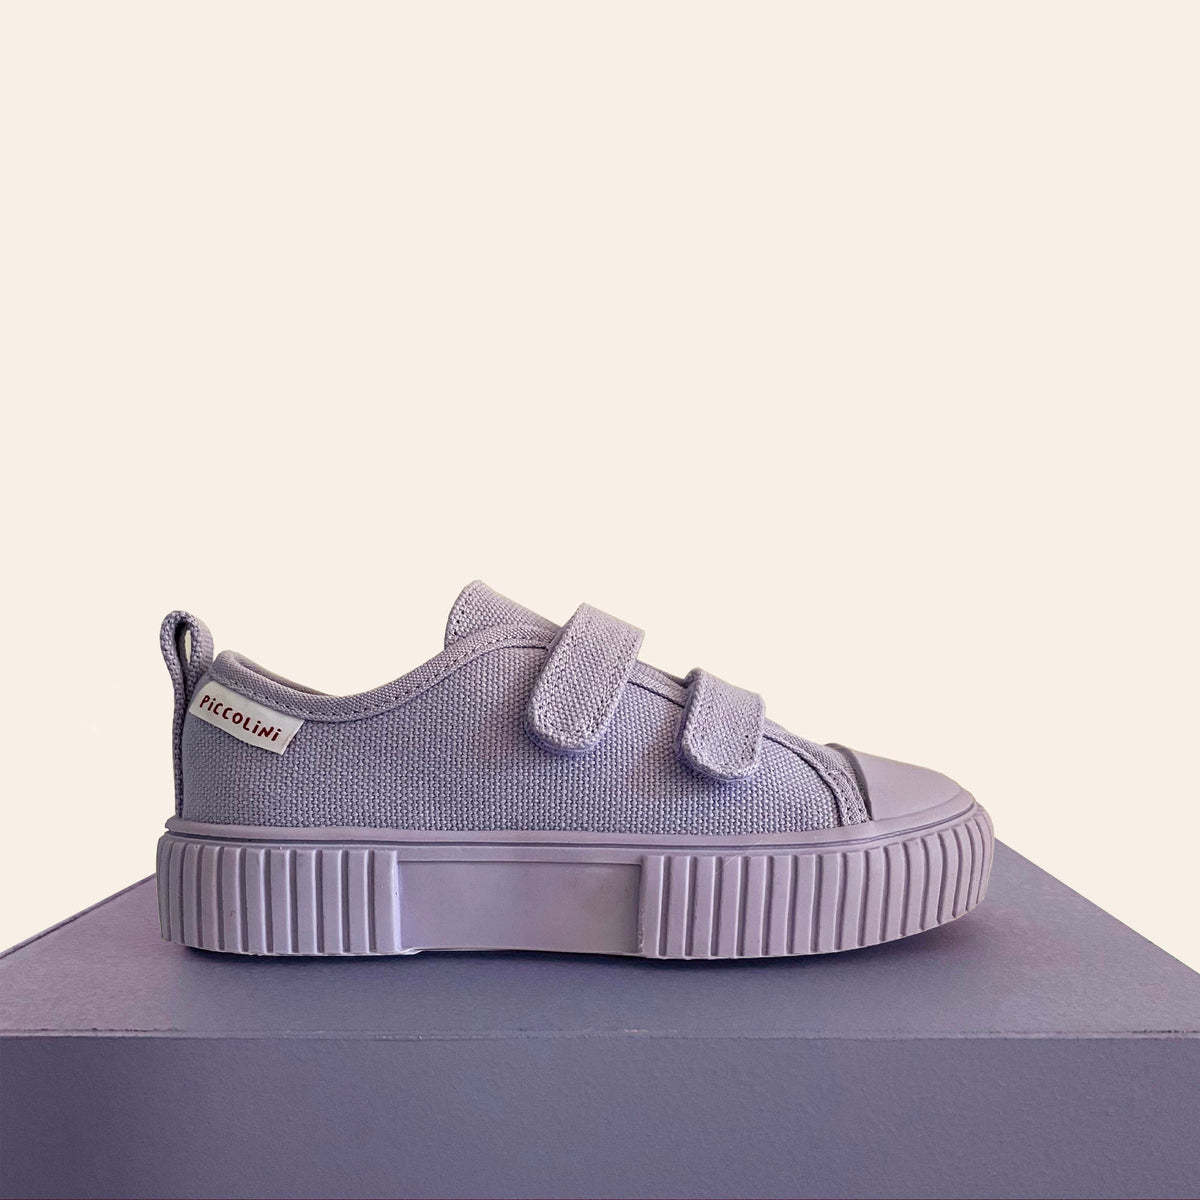 piccolini limited edition low top sneaker - lilac